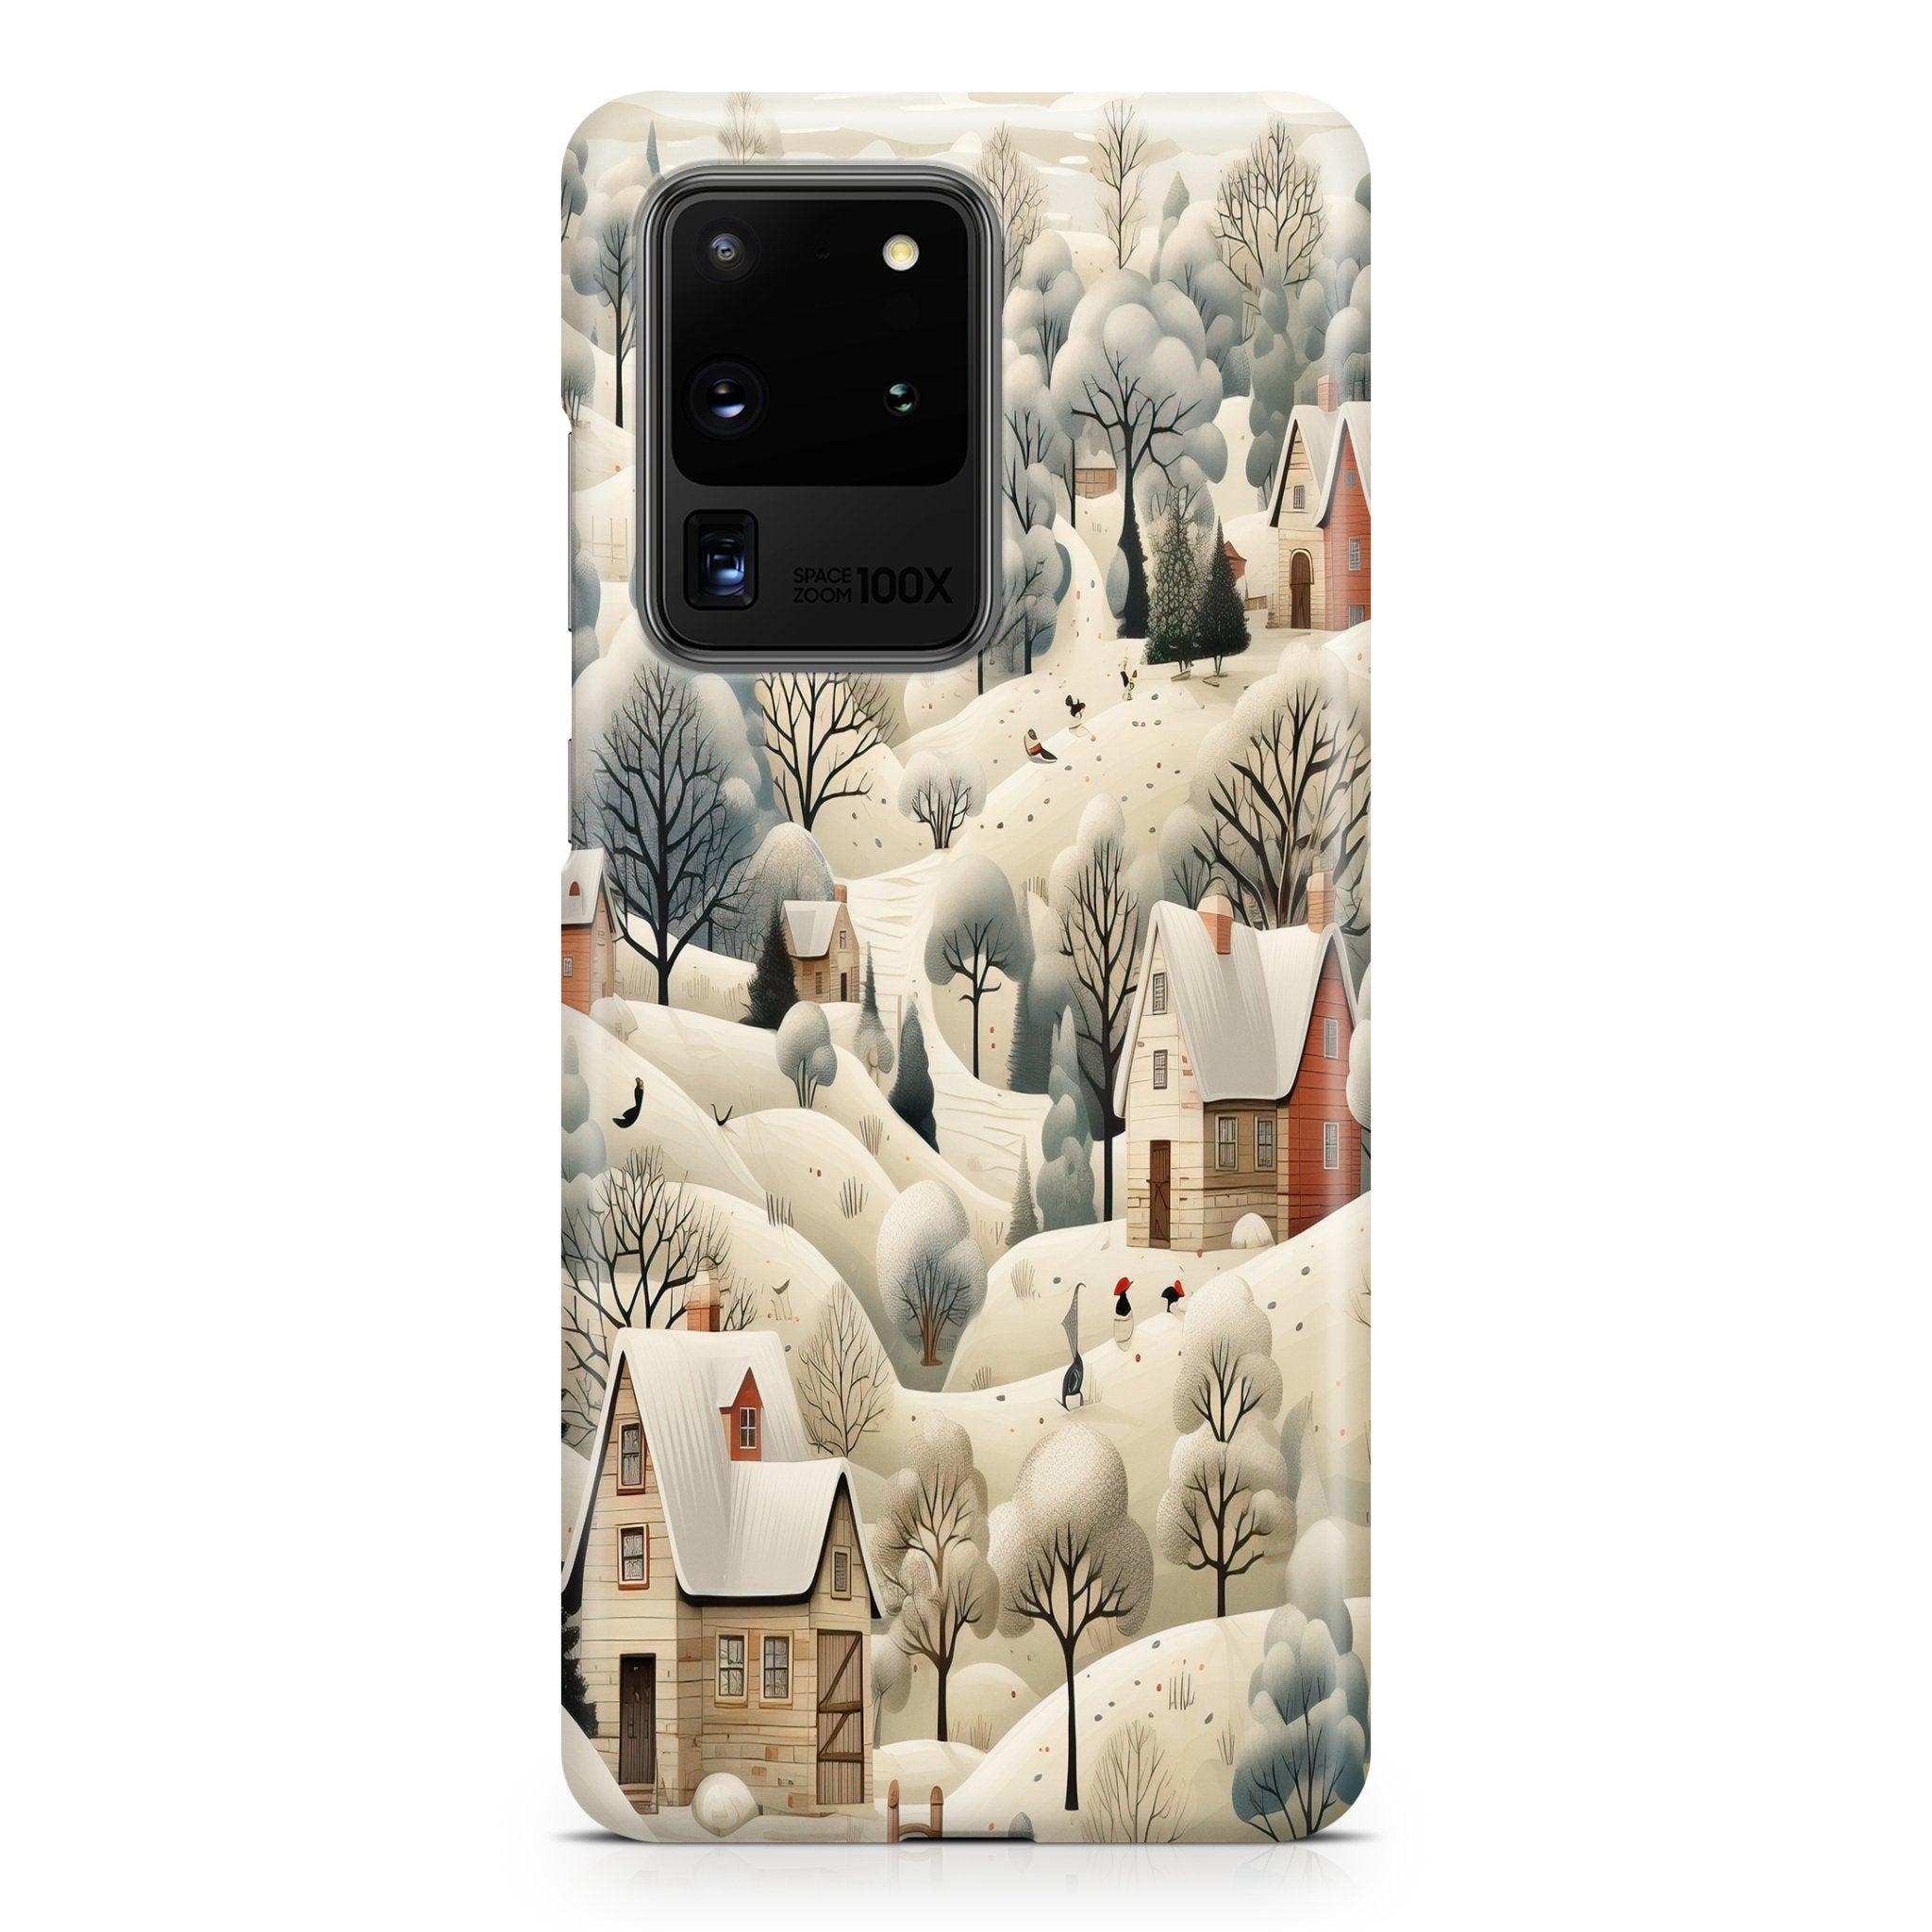 Snow Day - Samsung phone case designs by CaseSwagger